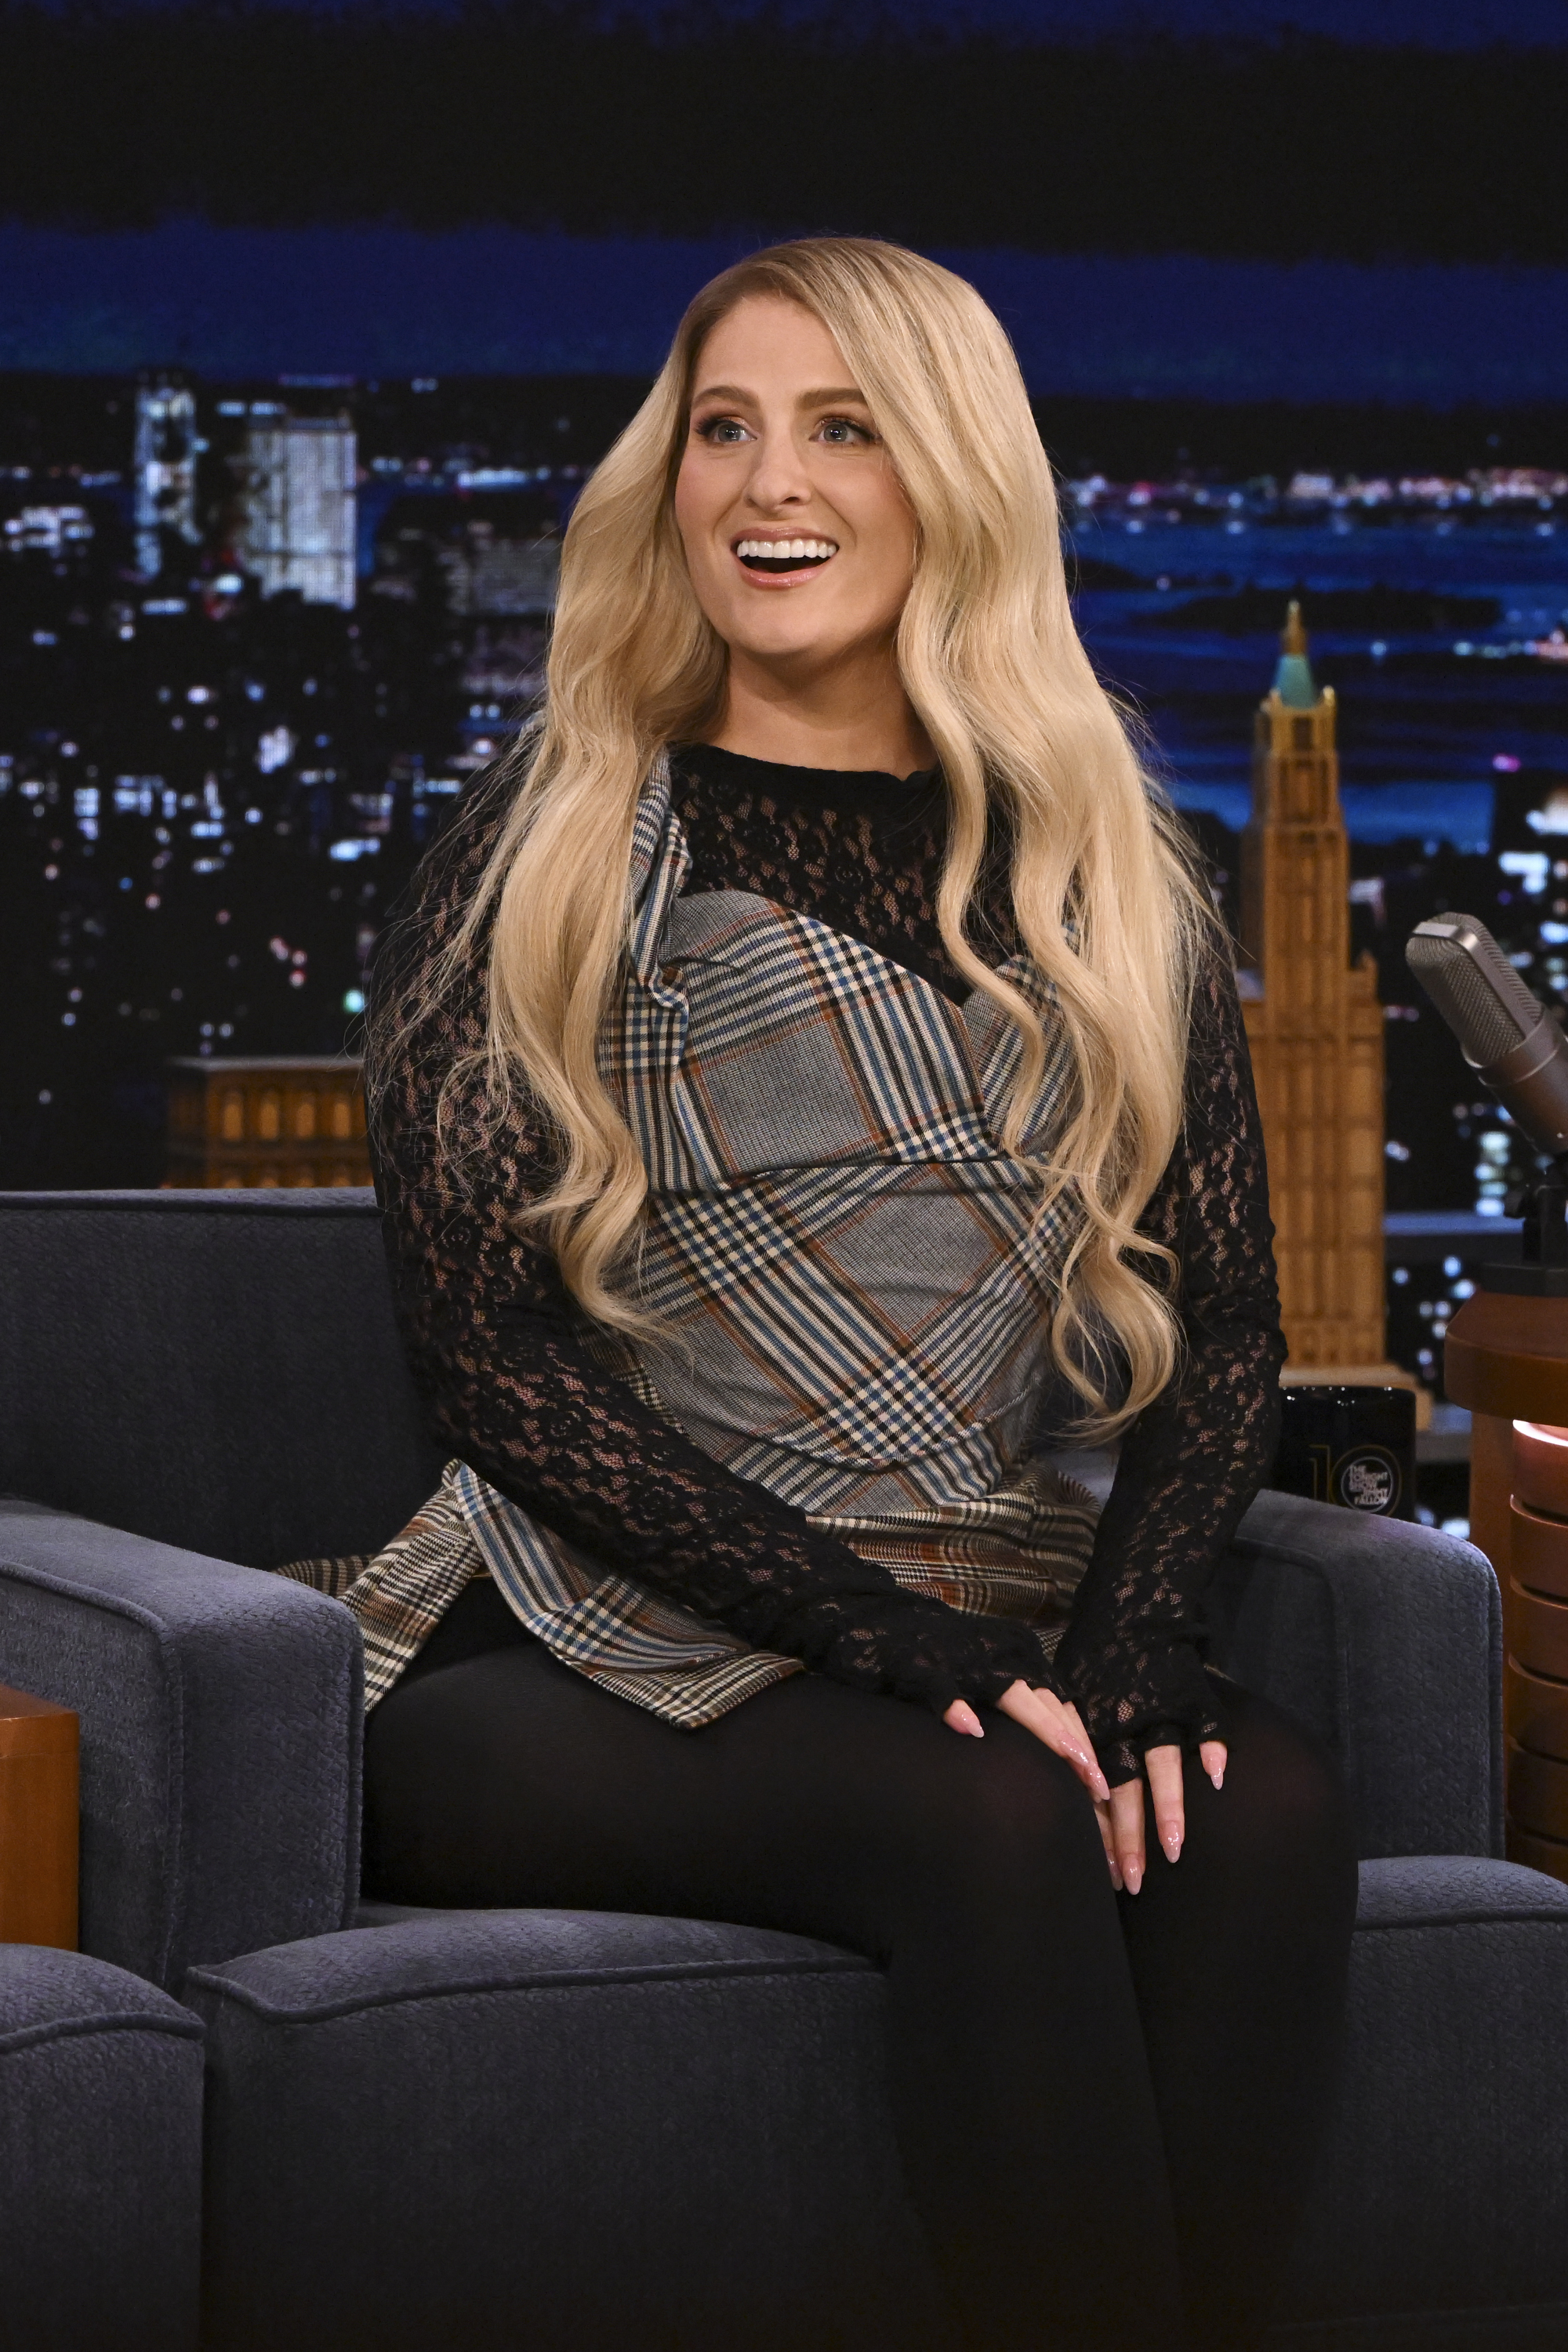 Meghan Trainor on a TV show set, wearing a patterned top with lace sleeves and leggings, seated and smiling